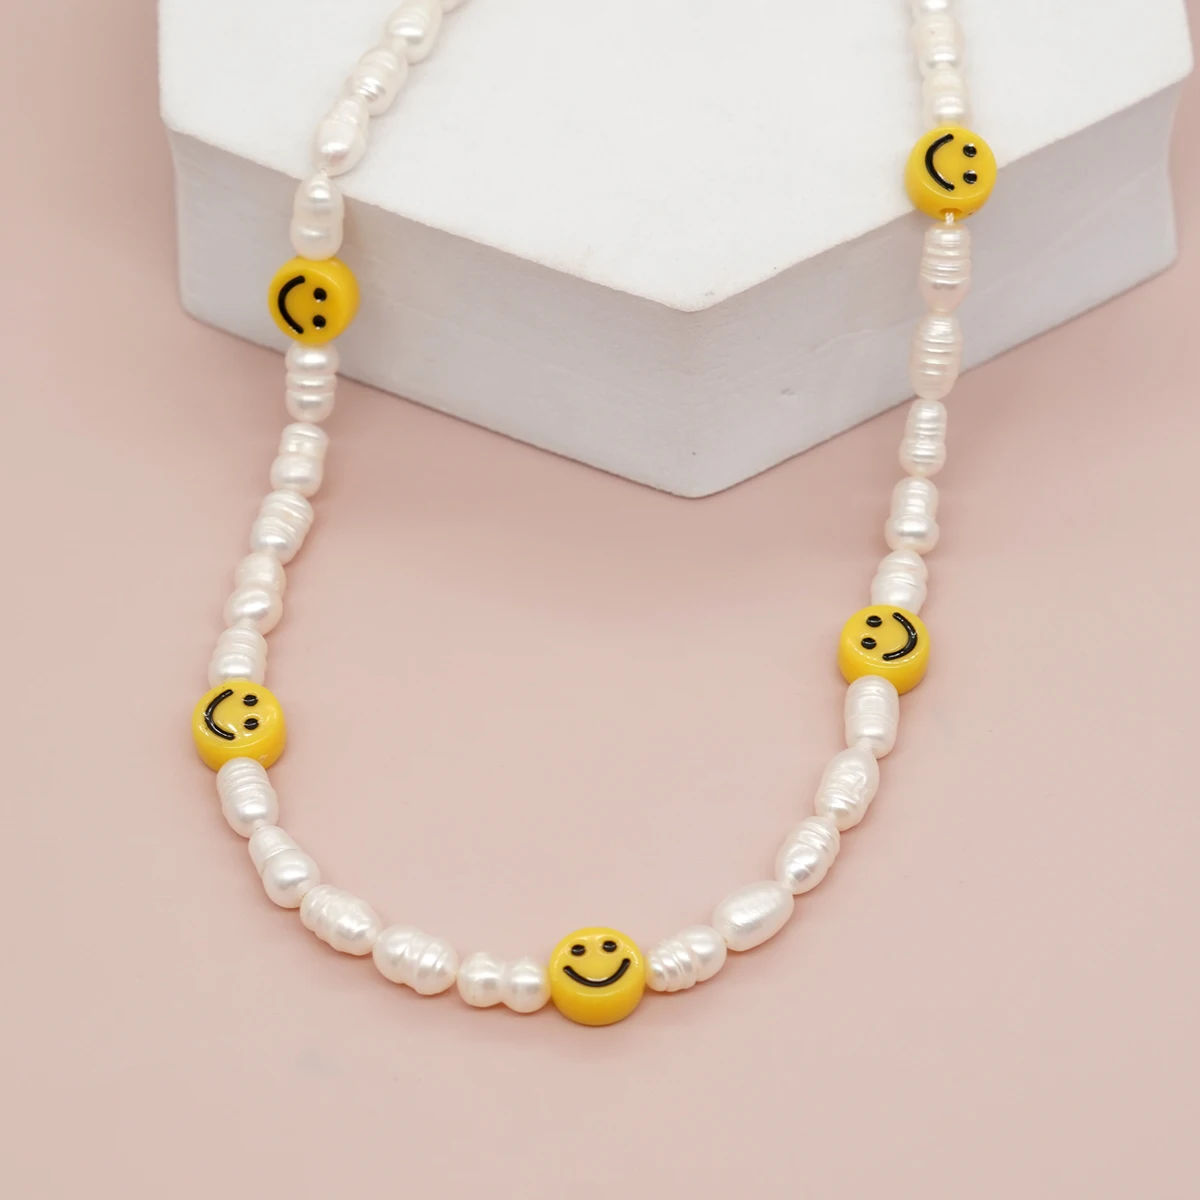 

YASTYT Natural Freshwater Pearl Choker Yellow Smiley Bead Necklace For Summer Beach Fashion Women Gift